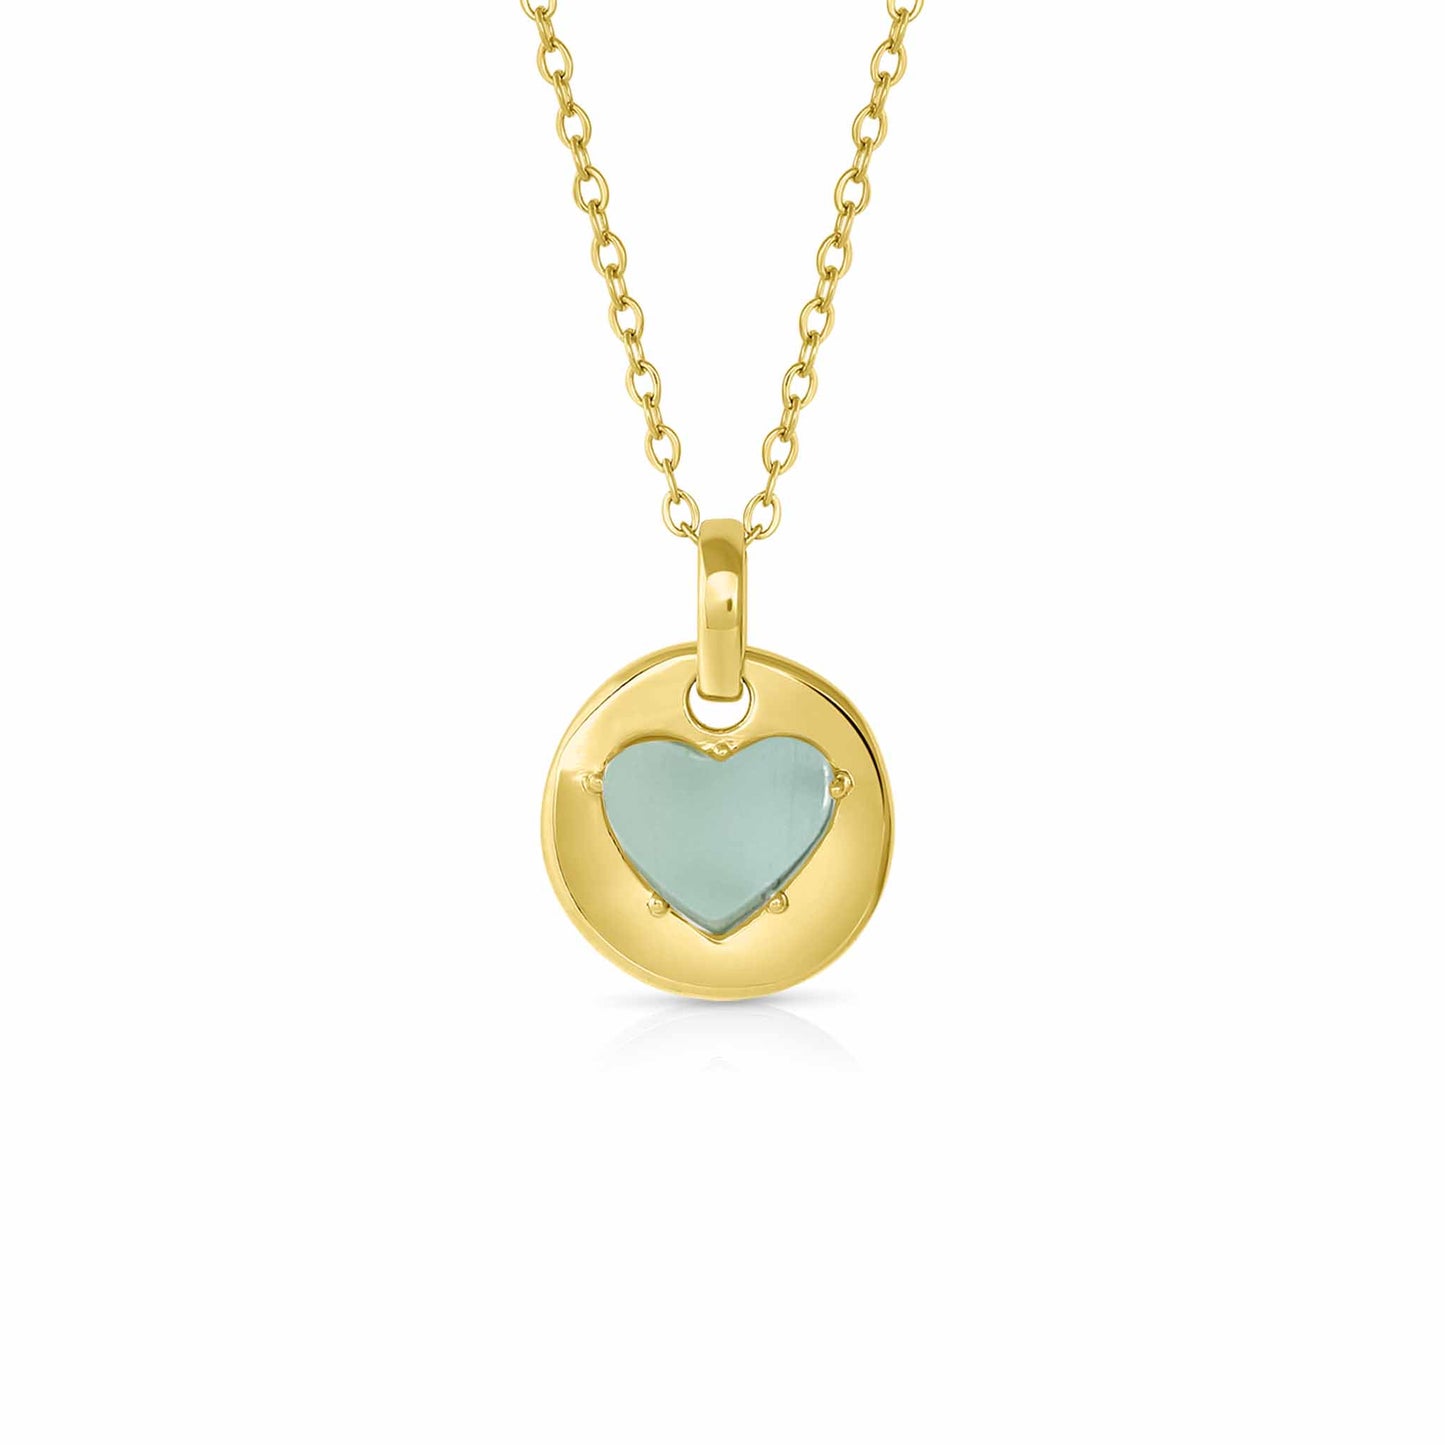 Aquamarine is March's birthstone and the gem for the 19th wedding anniversary. This unique charm necklace is the perfect gift for yourself, Mother's Day, Valentine's Day, graduation, Christmas and birthdays. A personalized gift idea for every mom, grandma, bride, bridesmaid, daughter, wife, mother-in-law & loved one.